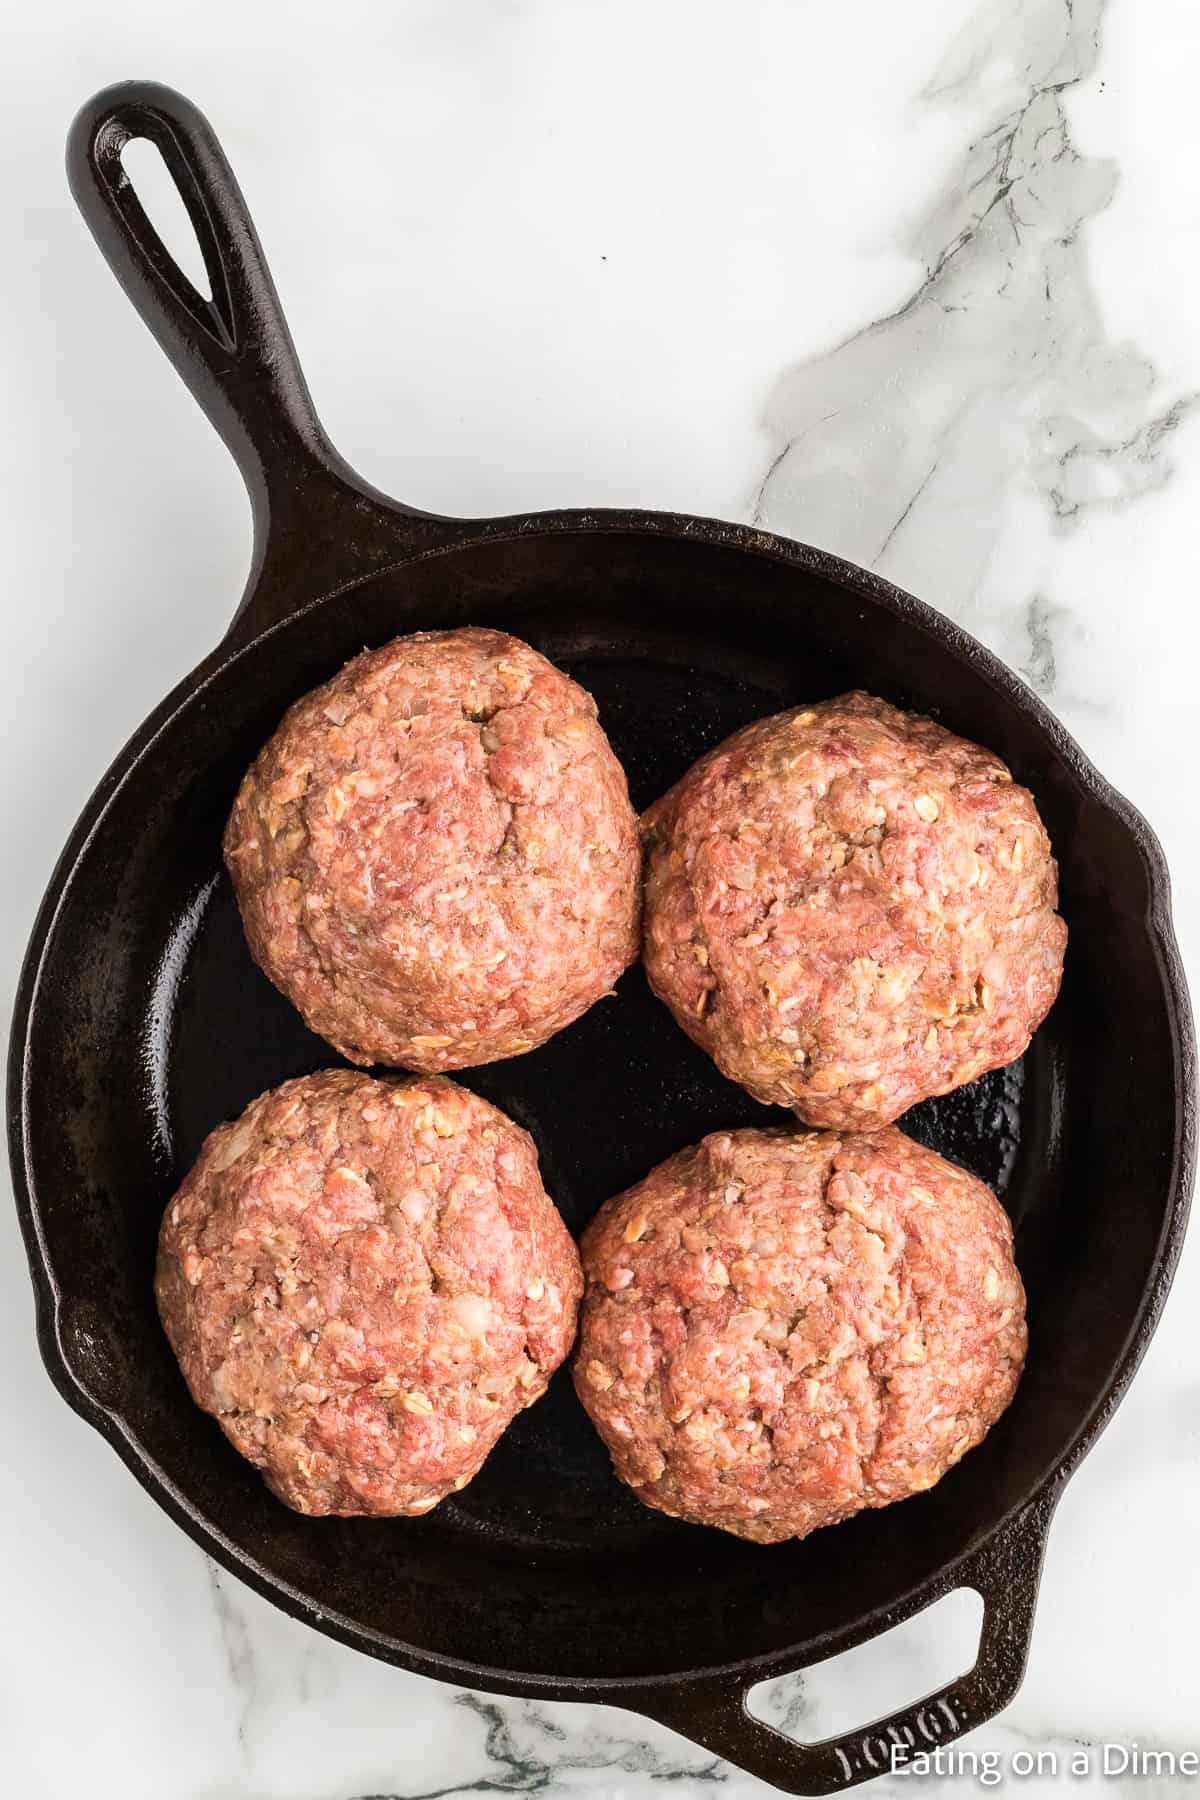 Placing ground beef patties in a cast iron skillet